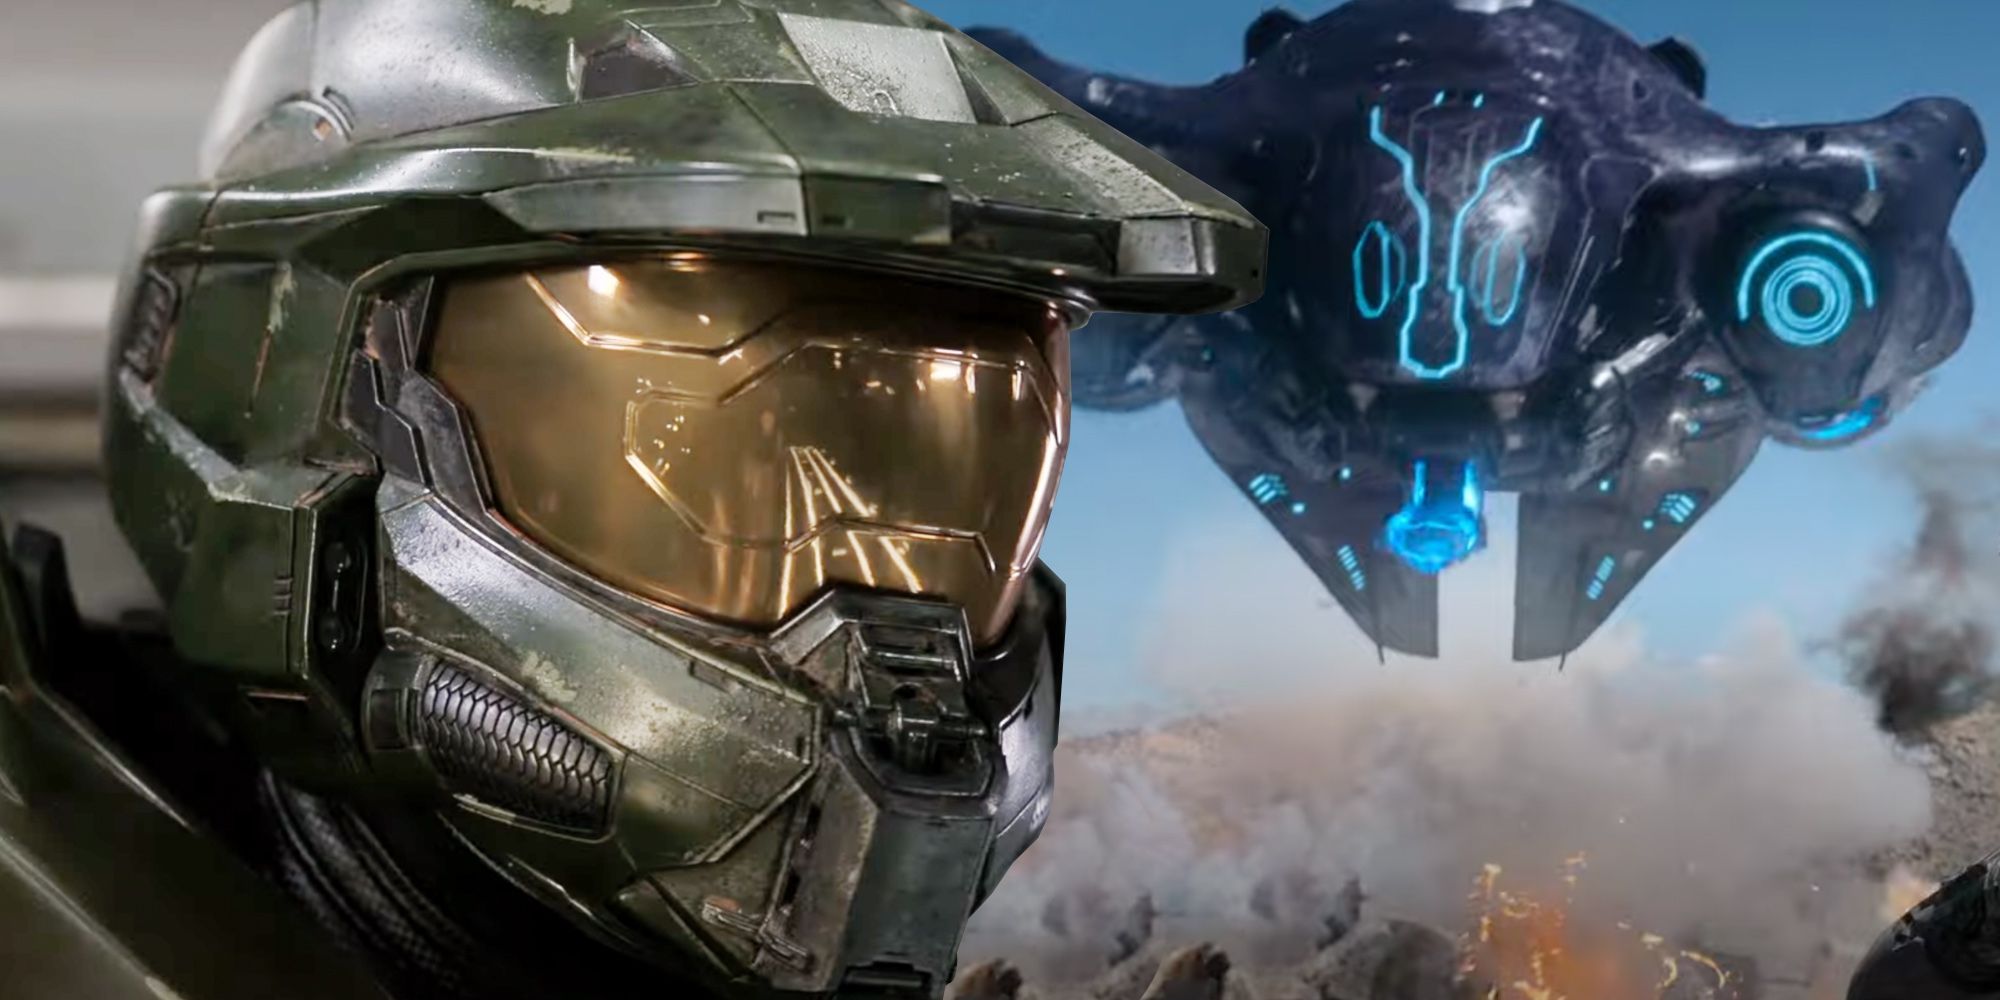 When Is The Halo TV Show Set? New Trailer Teases Timeline